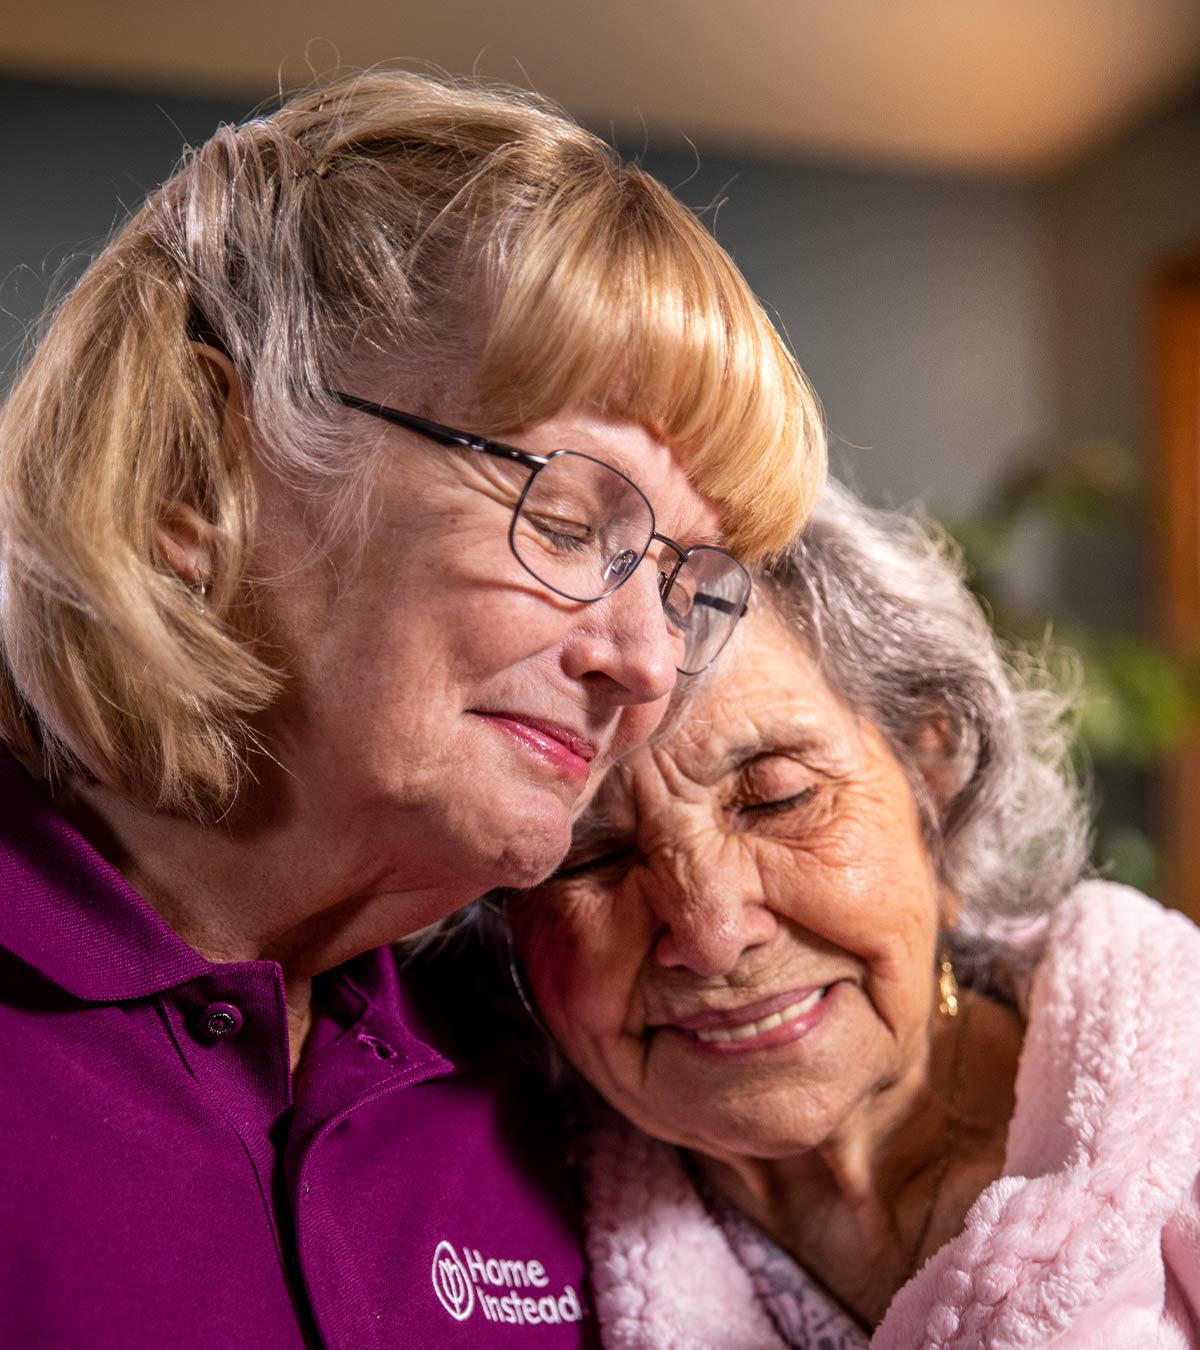 CAREGiver providing in-home senior care services. Home Instead of Whittier, CA provides Elder Care to aging adults. 